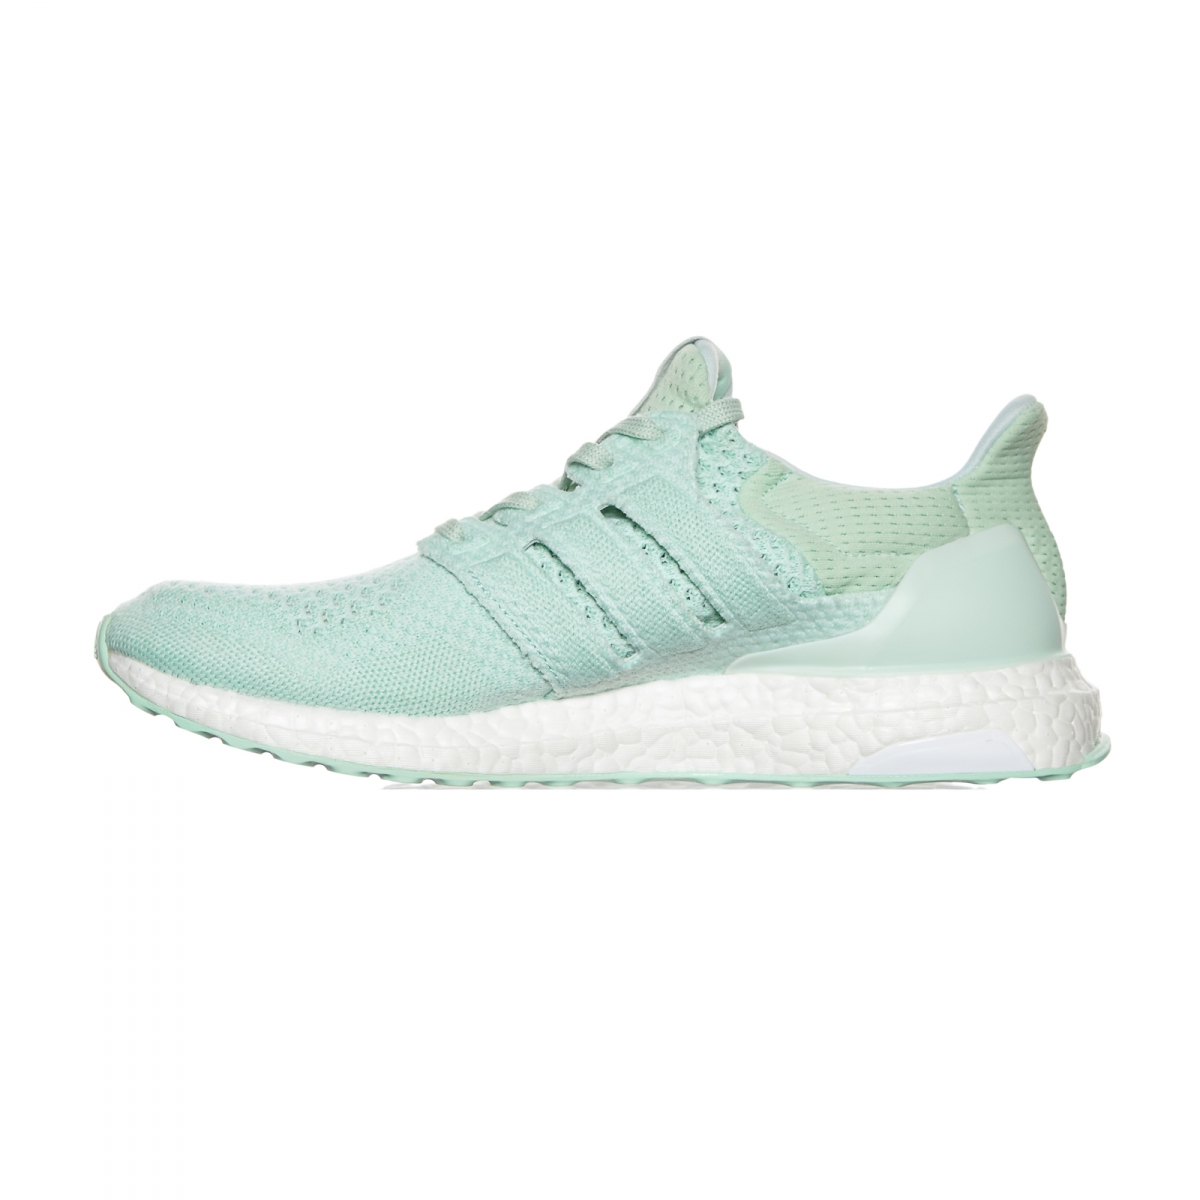 Adidas Consortium x Naked
Ultra Boost Primeknit
« Waves Pack »
Mint Green / White